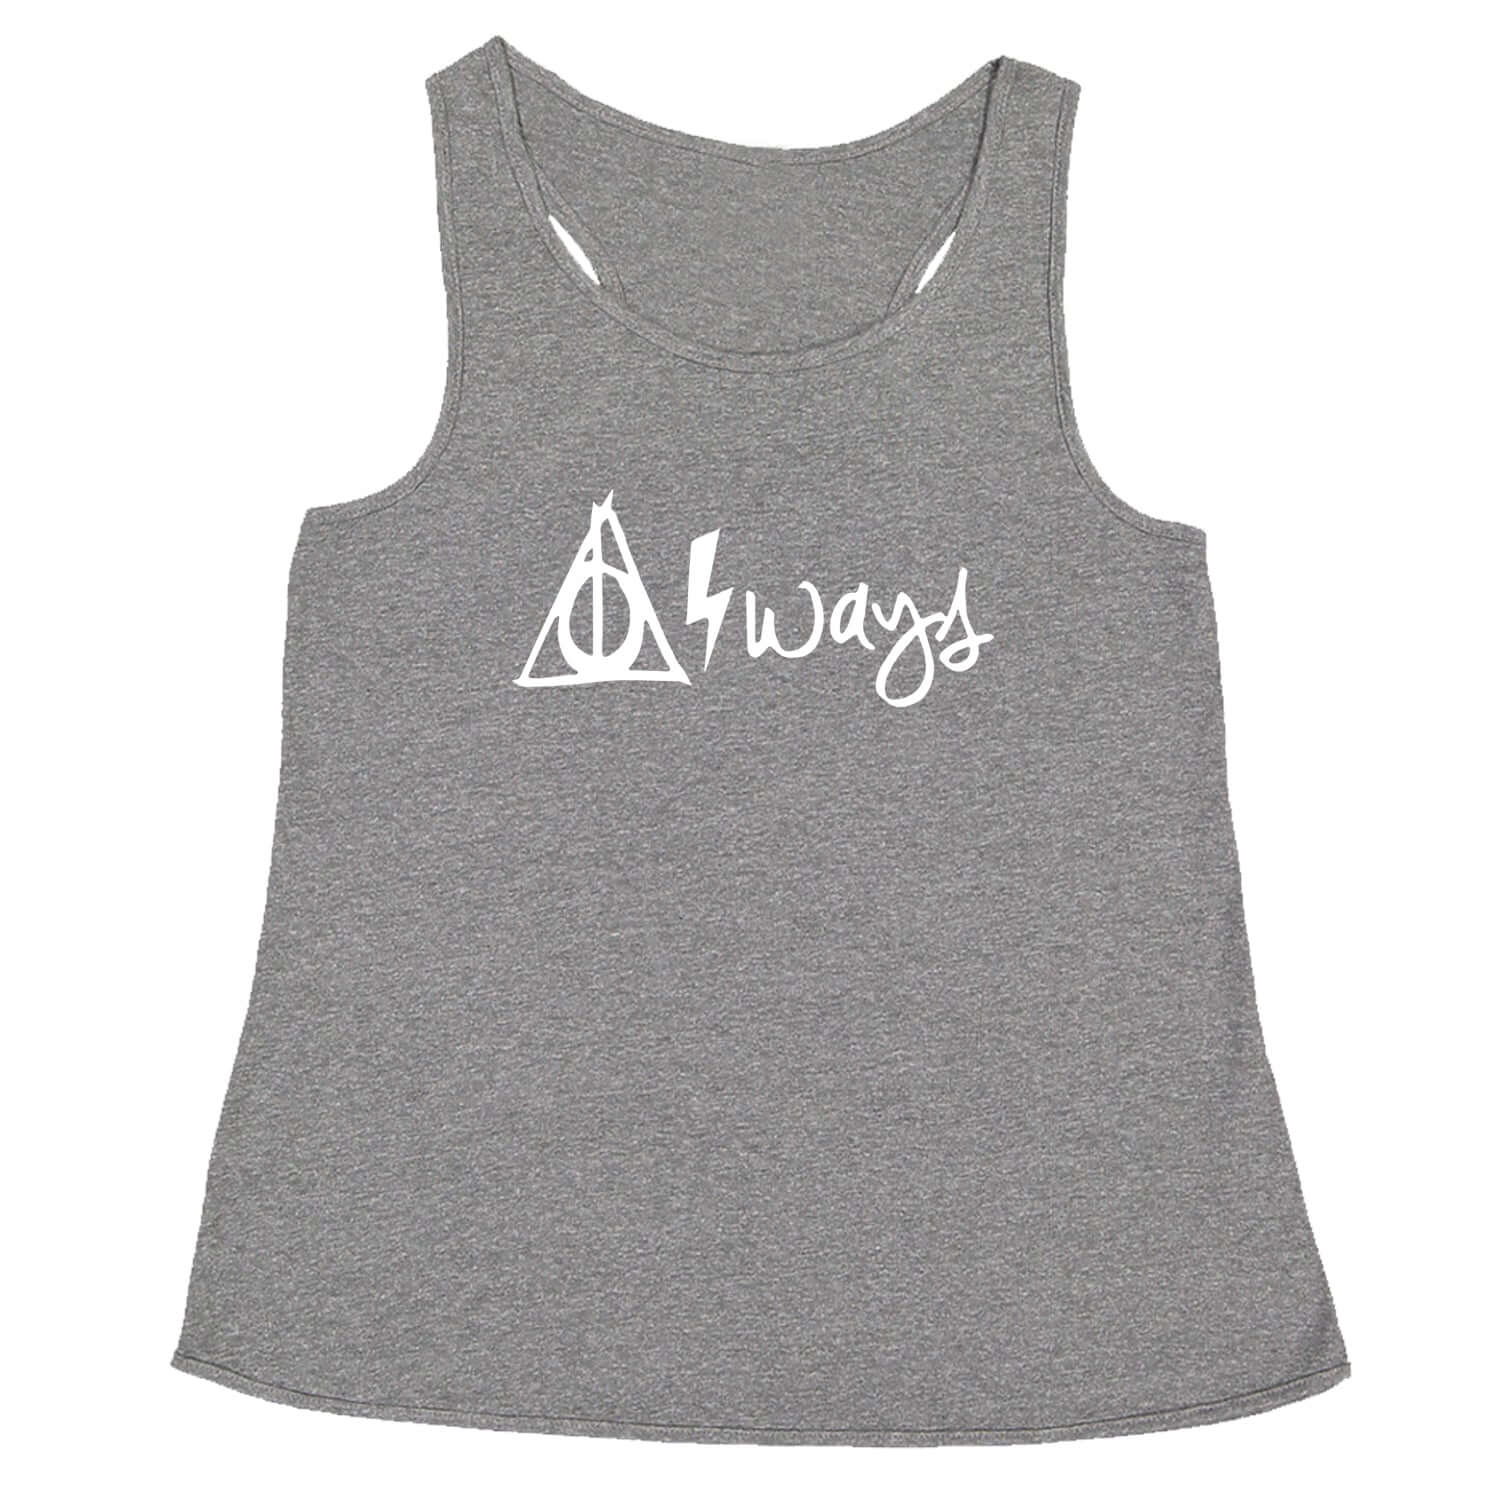 Always Lightning Bolt Racerback Tank Top for Women #expressiontees by Expression Tees